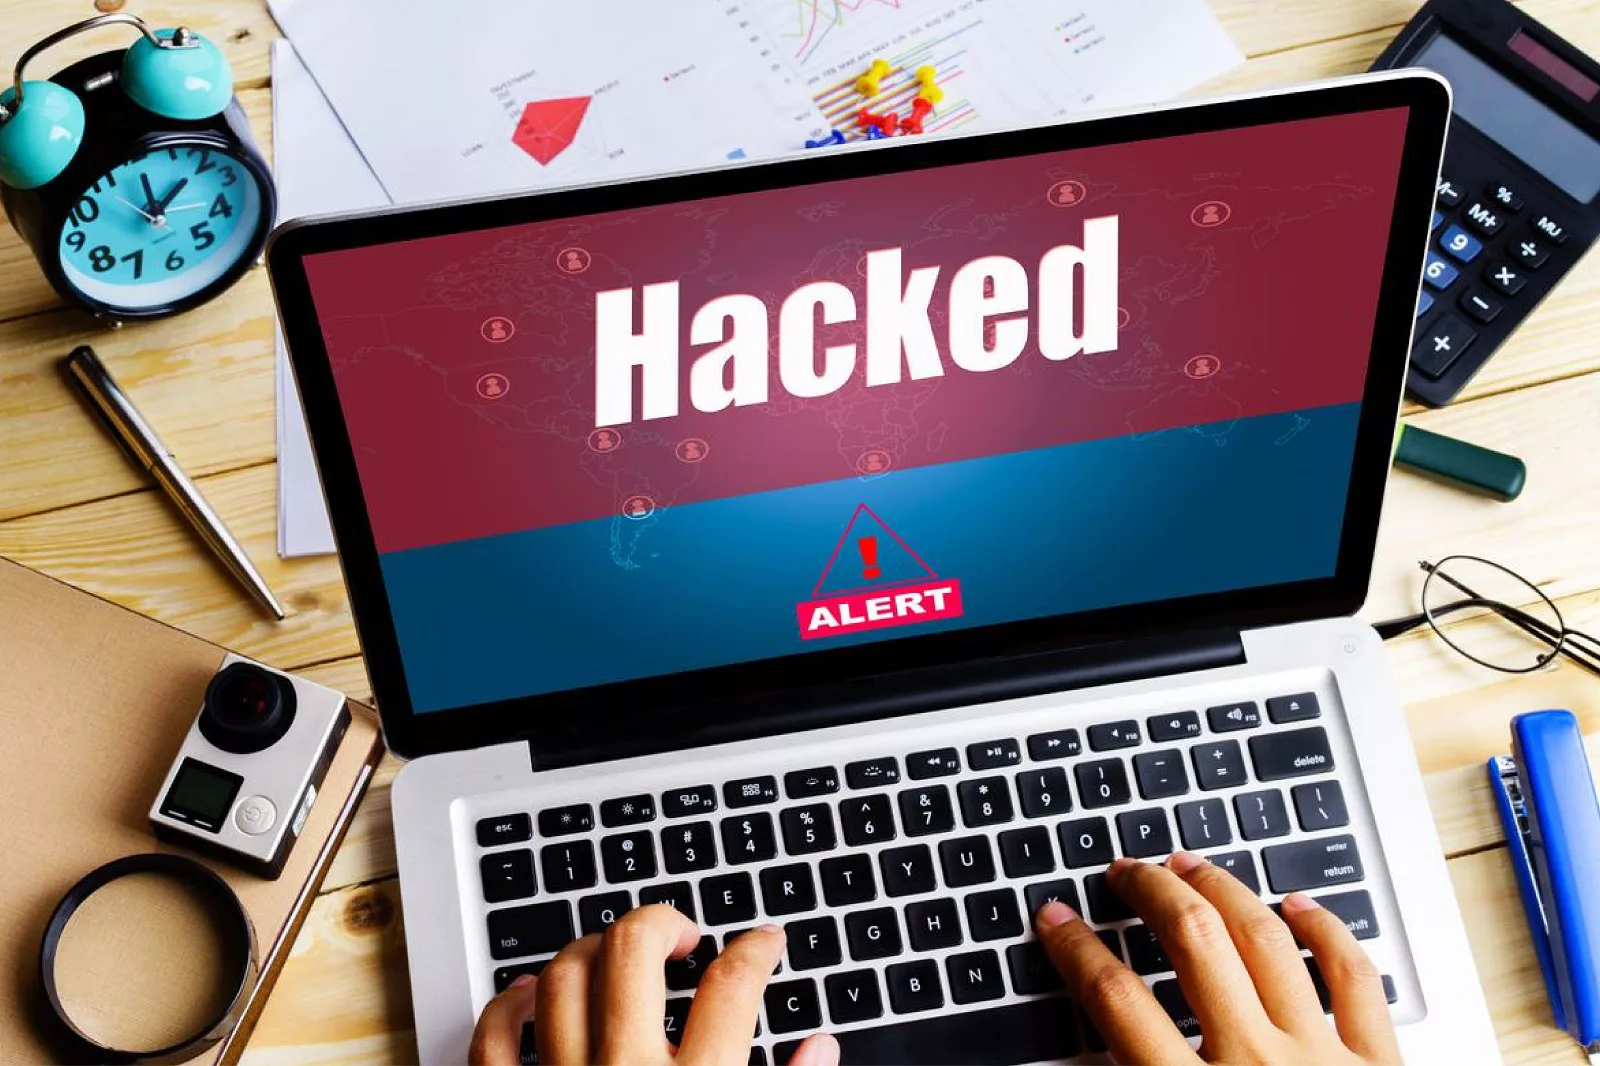 What are the essential security measures to protect against website hacking